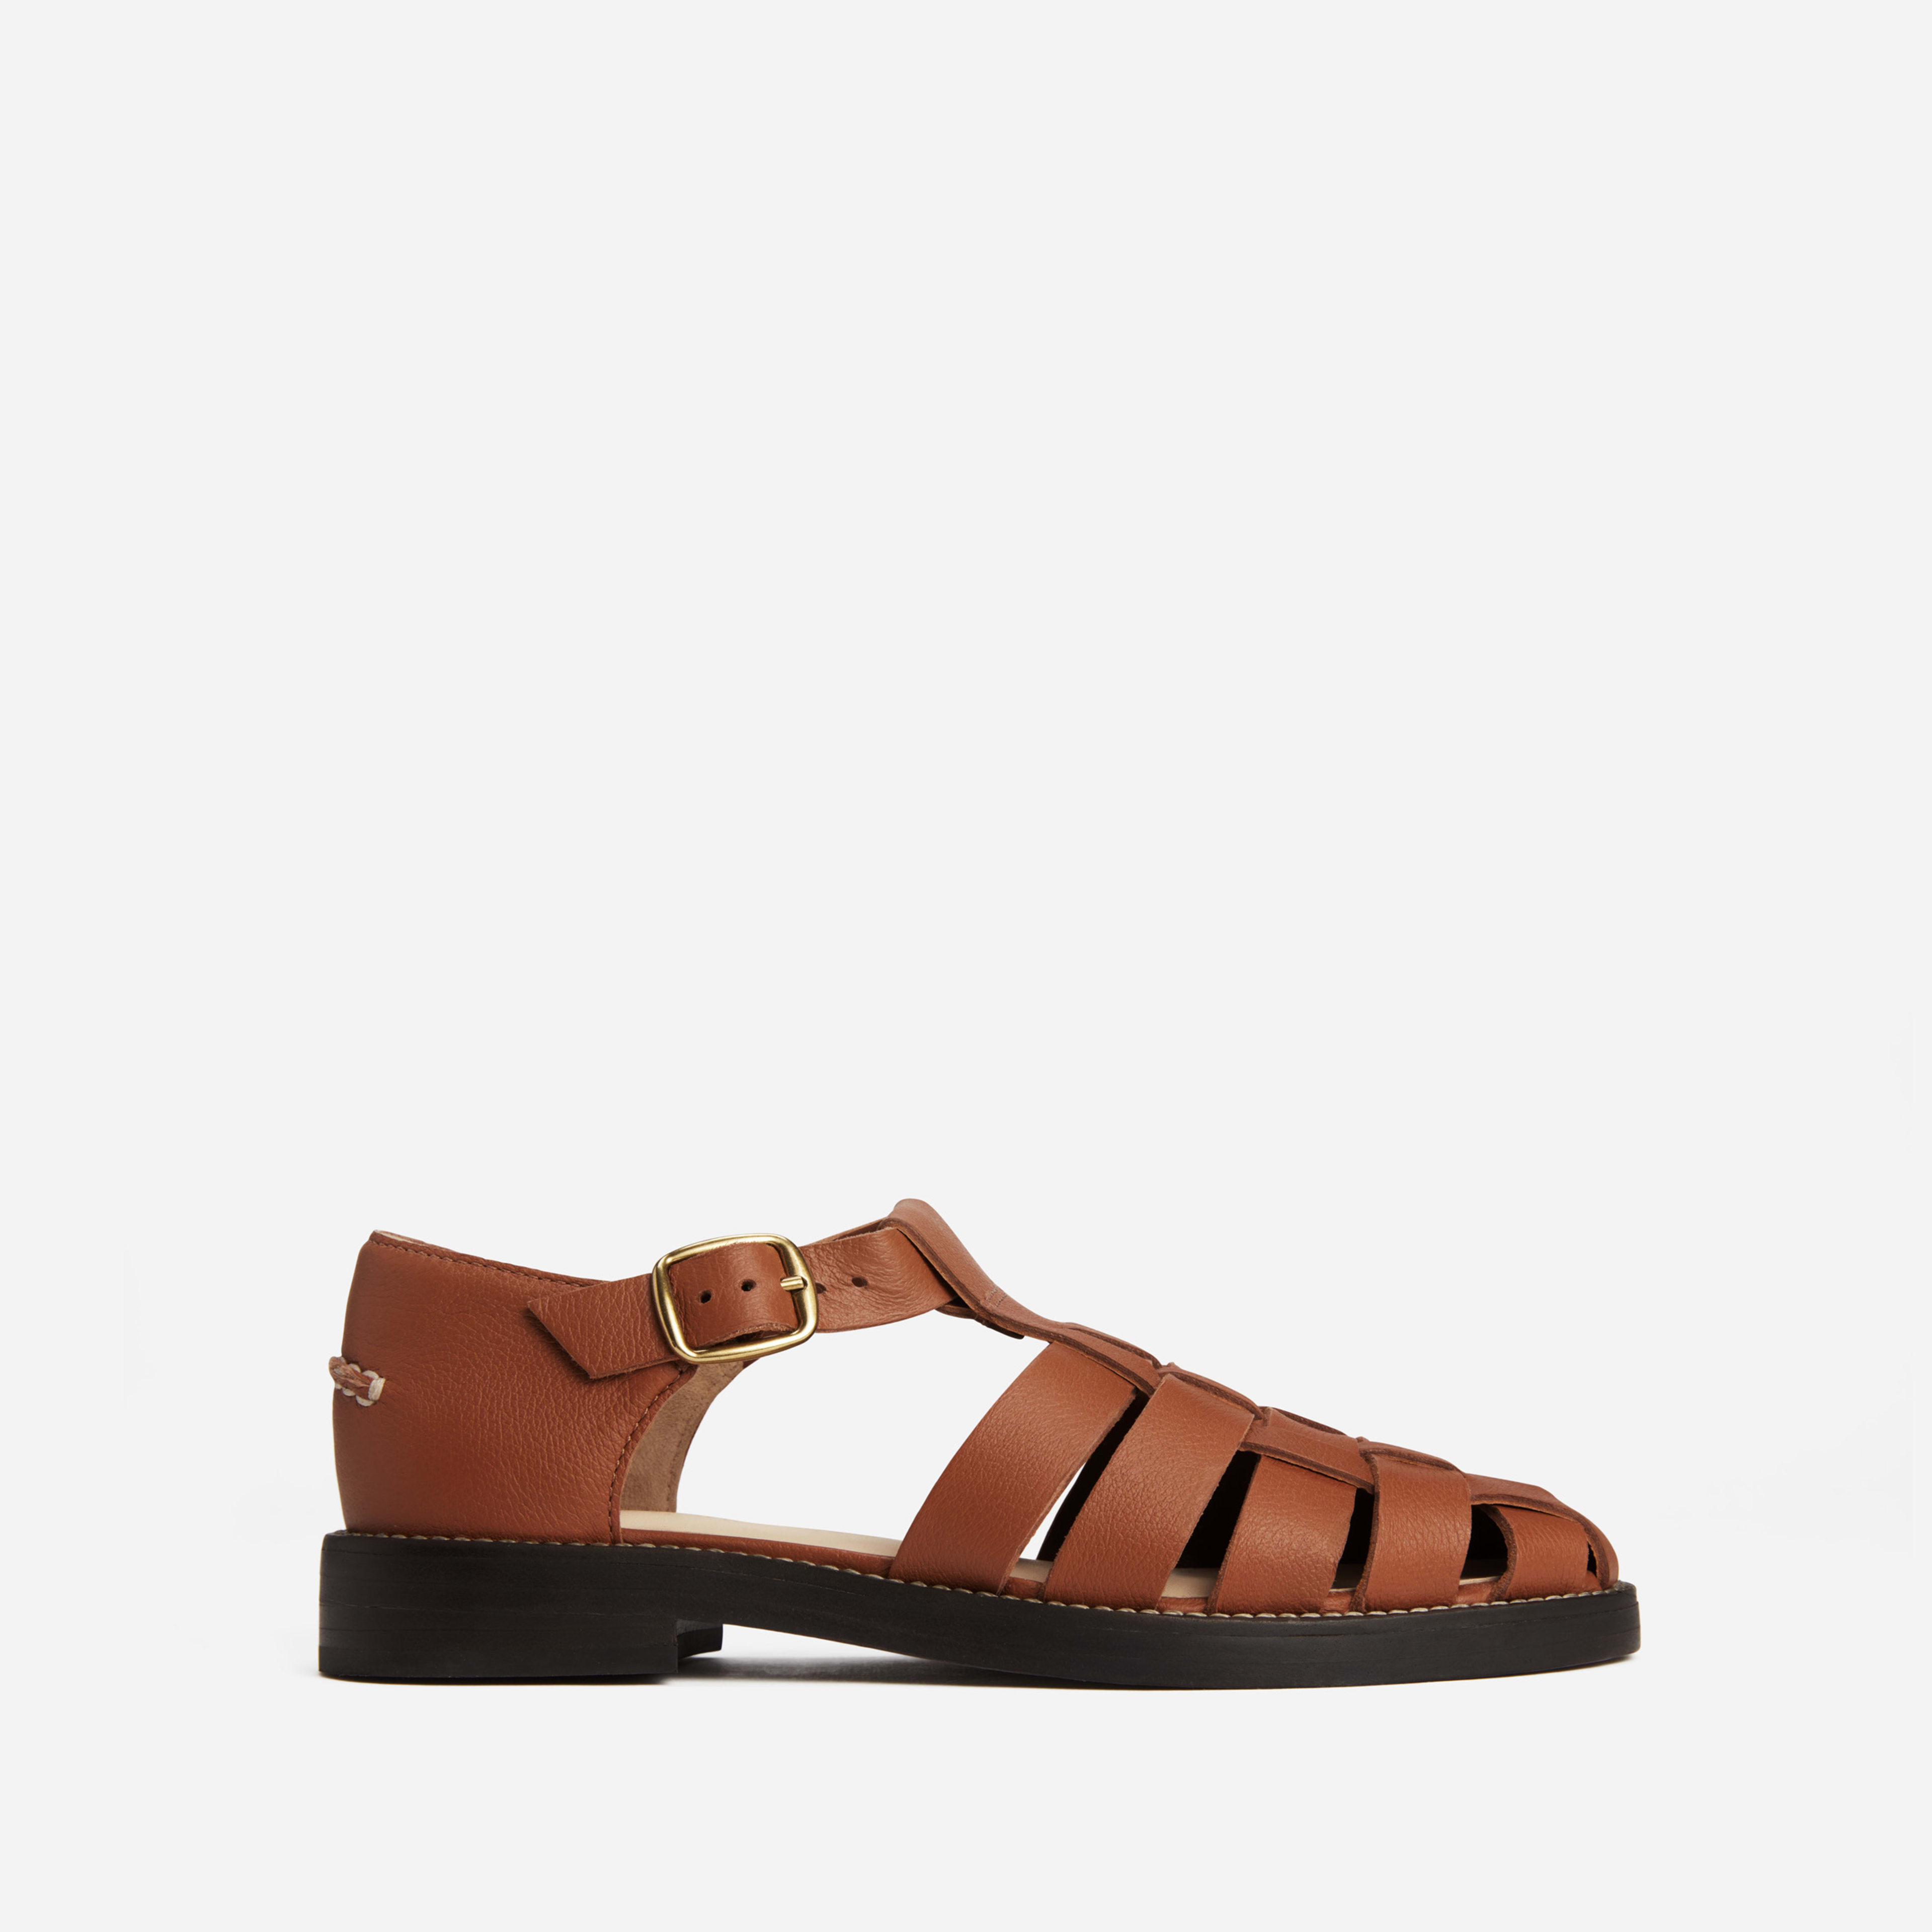 Leather Fisherman Sandal by Everlane in Adobe Brown, Size 7